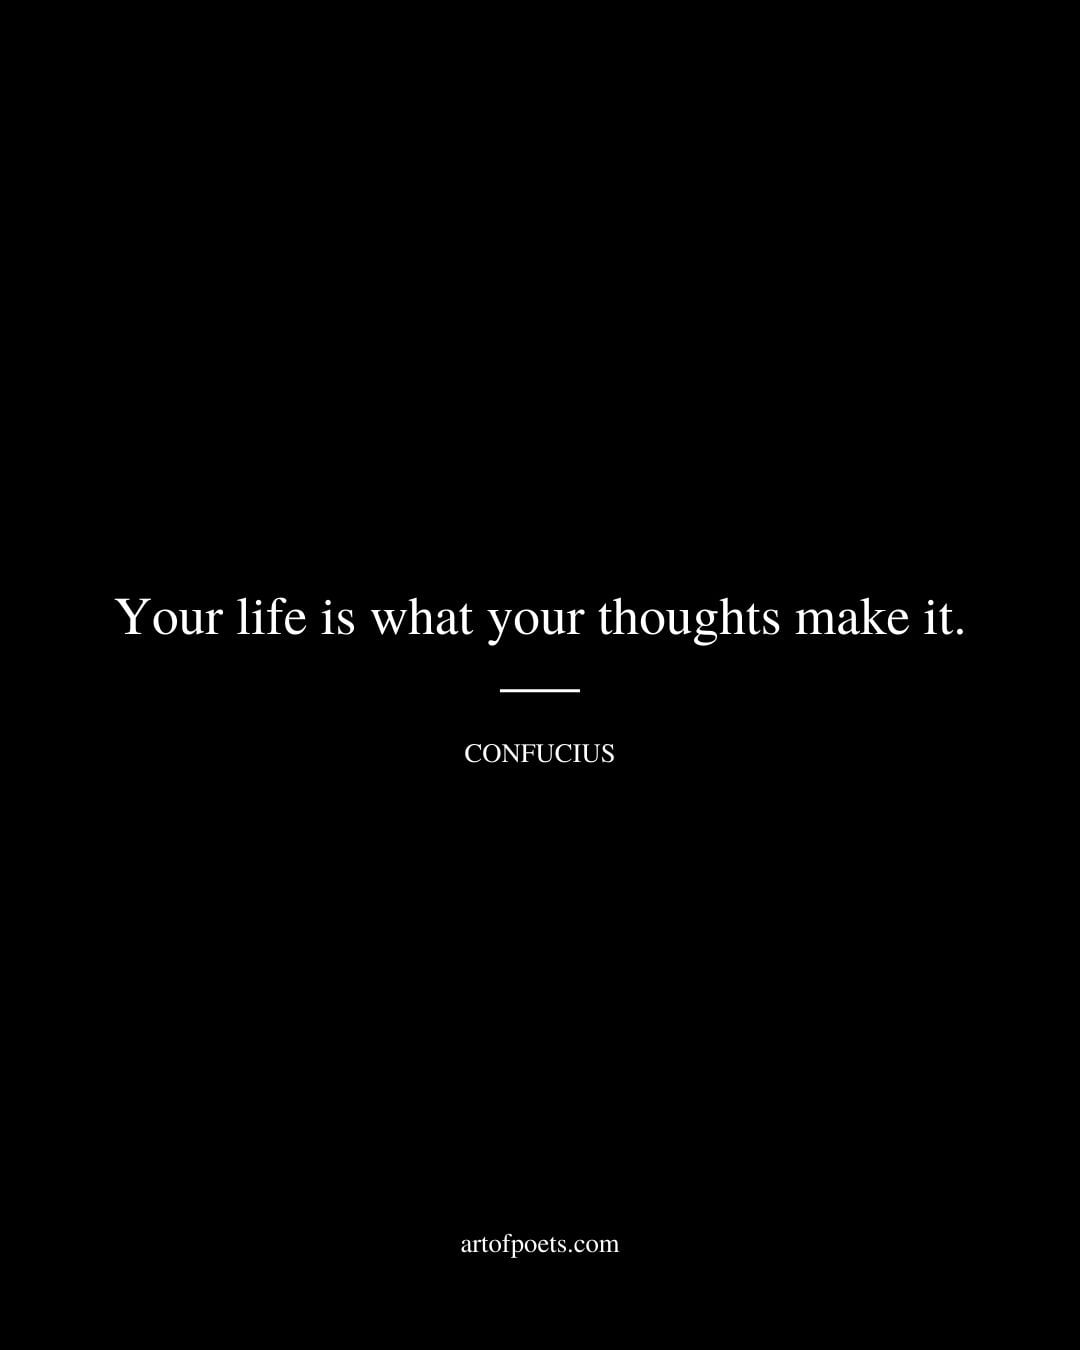 Your life is what your thoughts make it